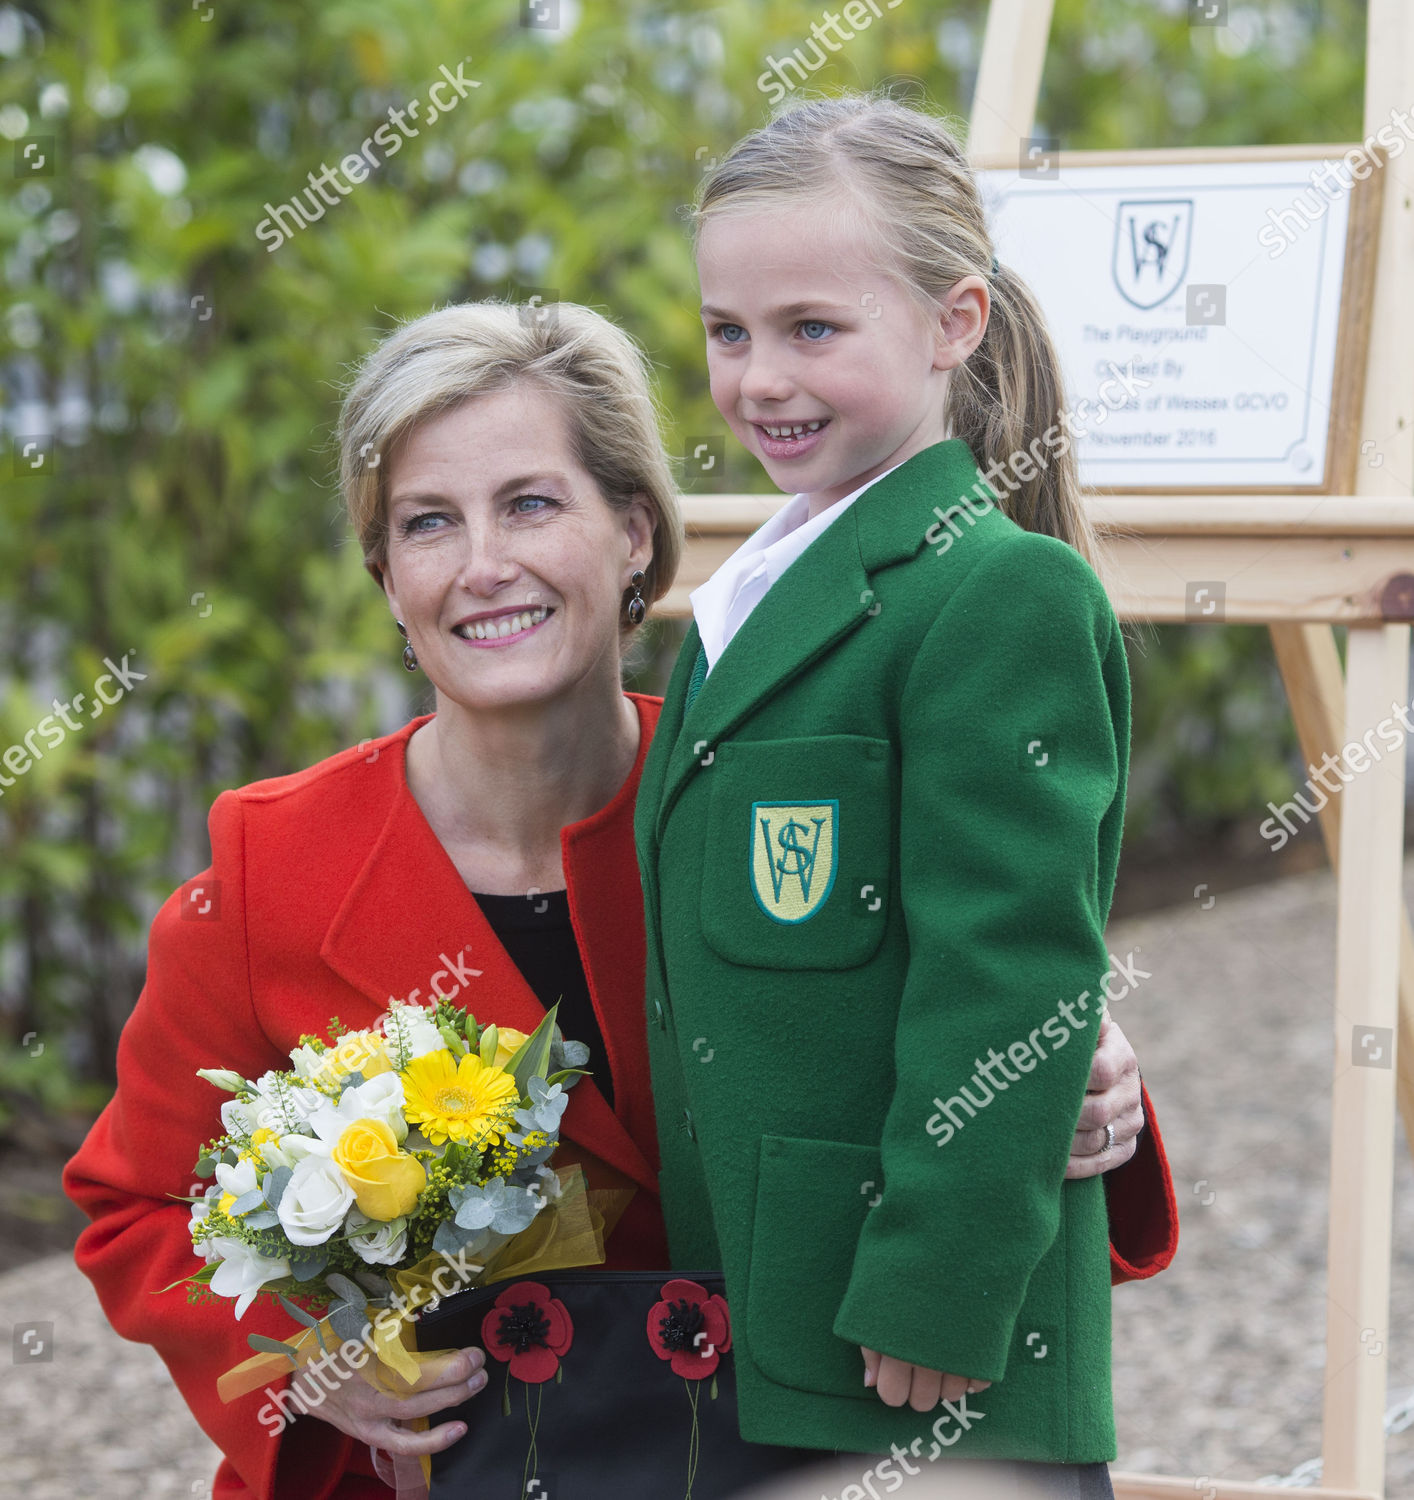 sophie-countess-of-wessex-opens-a-new-playground-wokingham-uk-shutterstock-editorial-7429721z.jpg